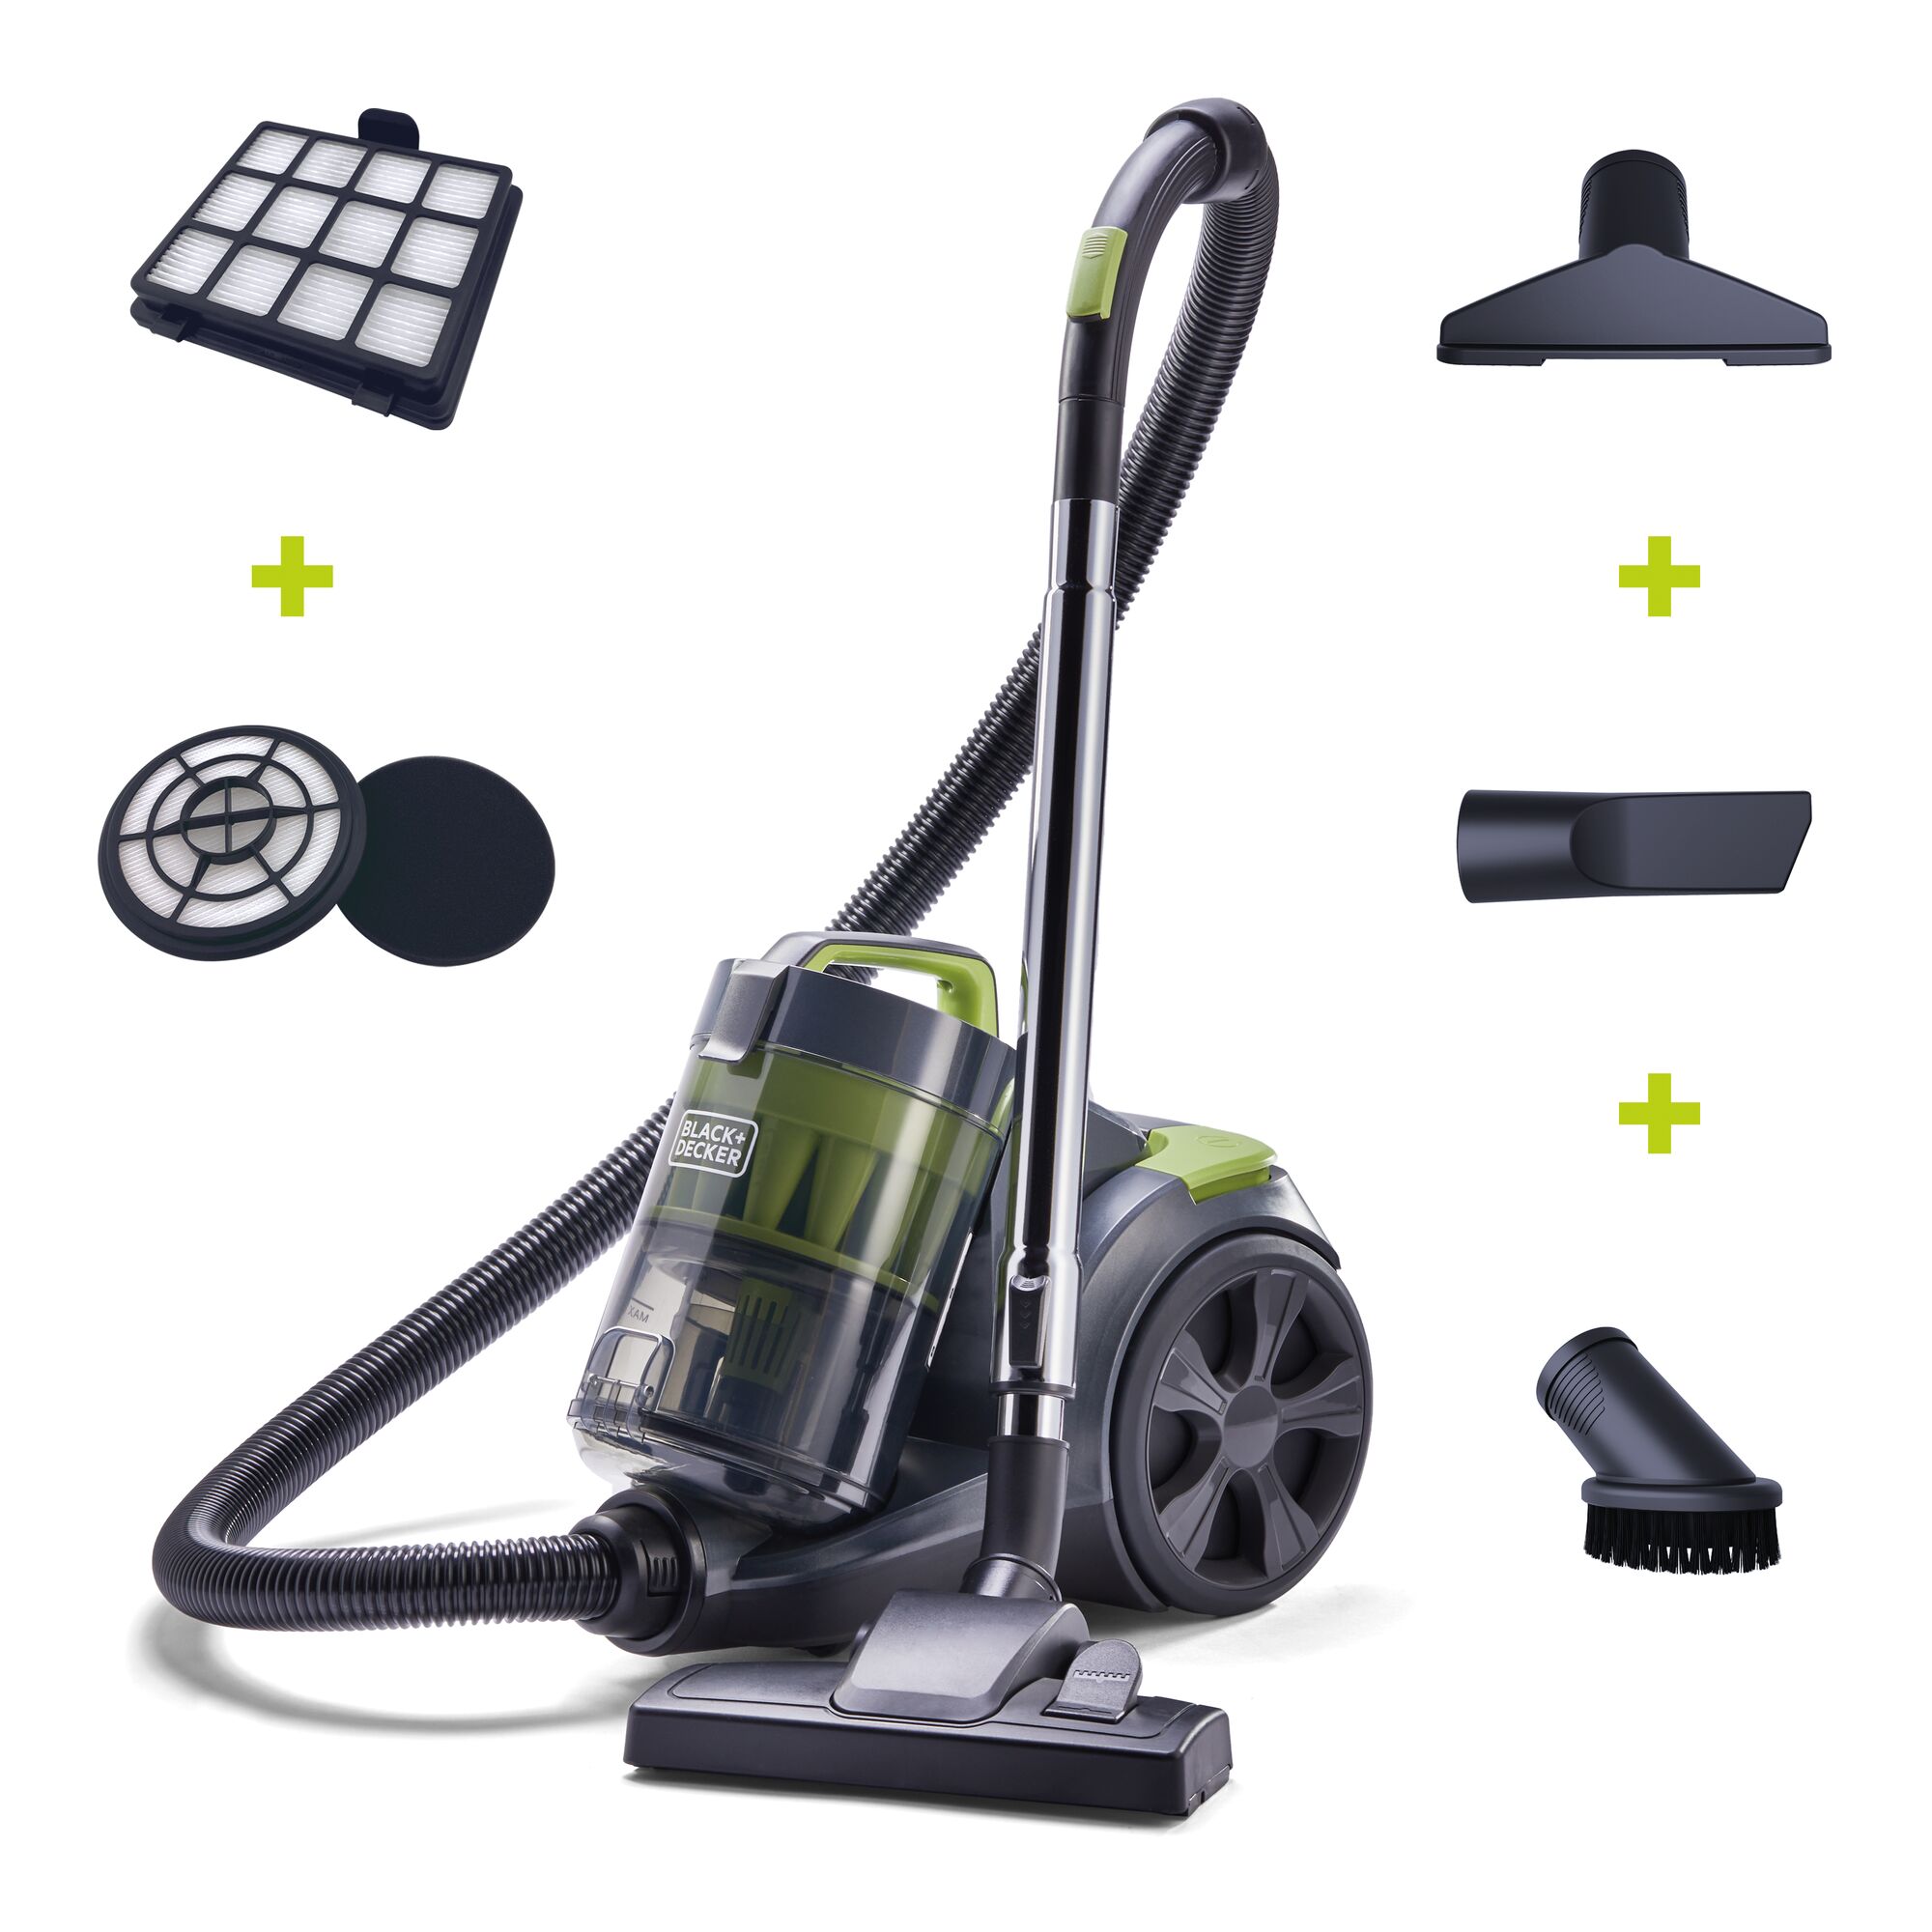 Bagless Multi-Cyclonic Canister Vacuum with included accessories on a white background.